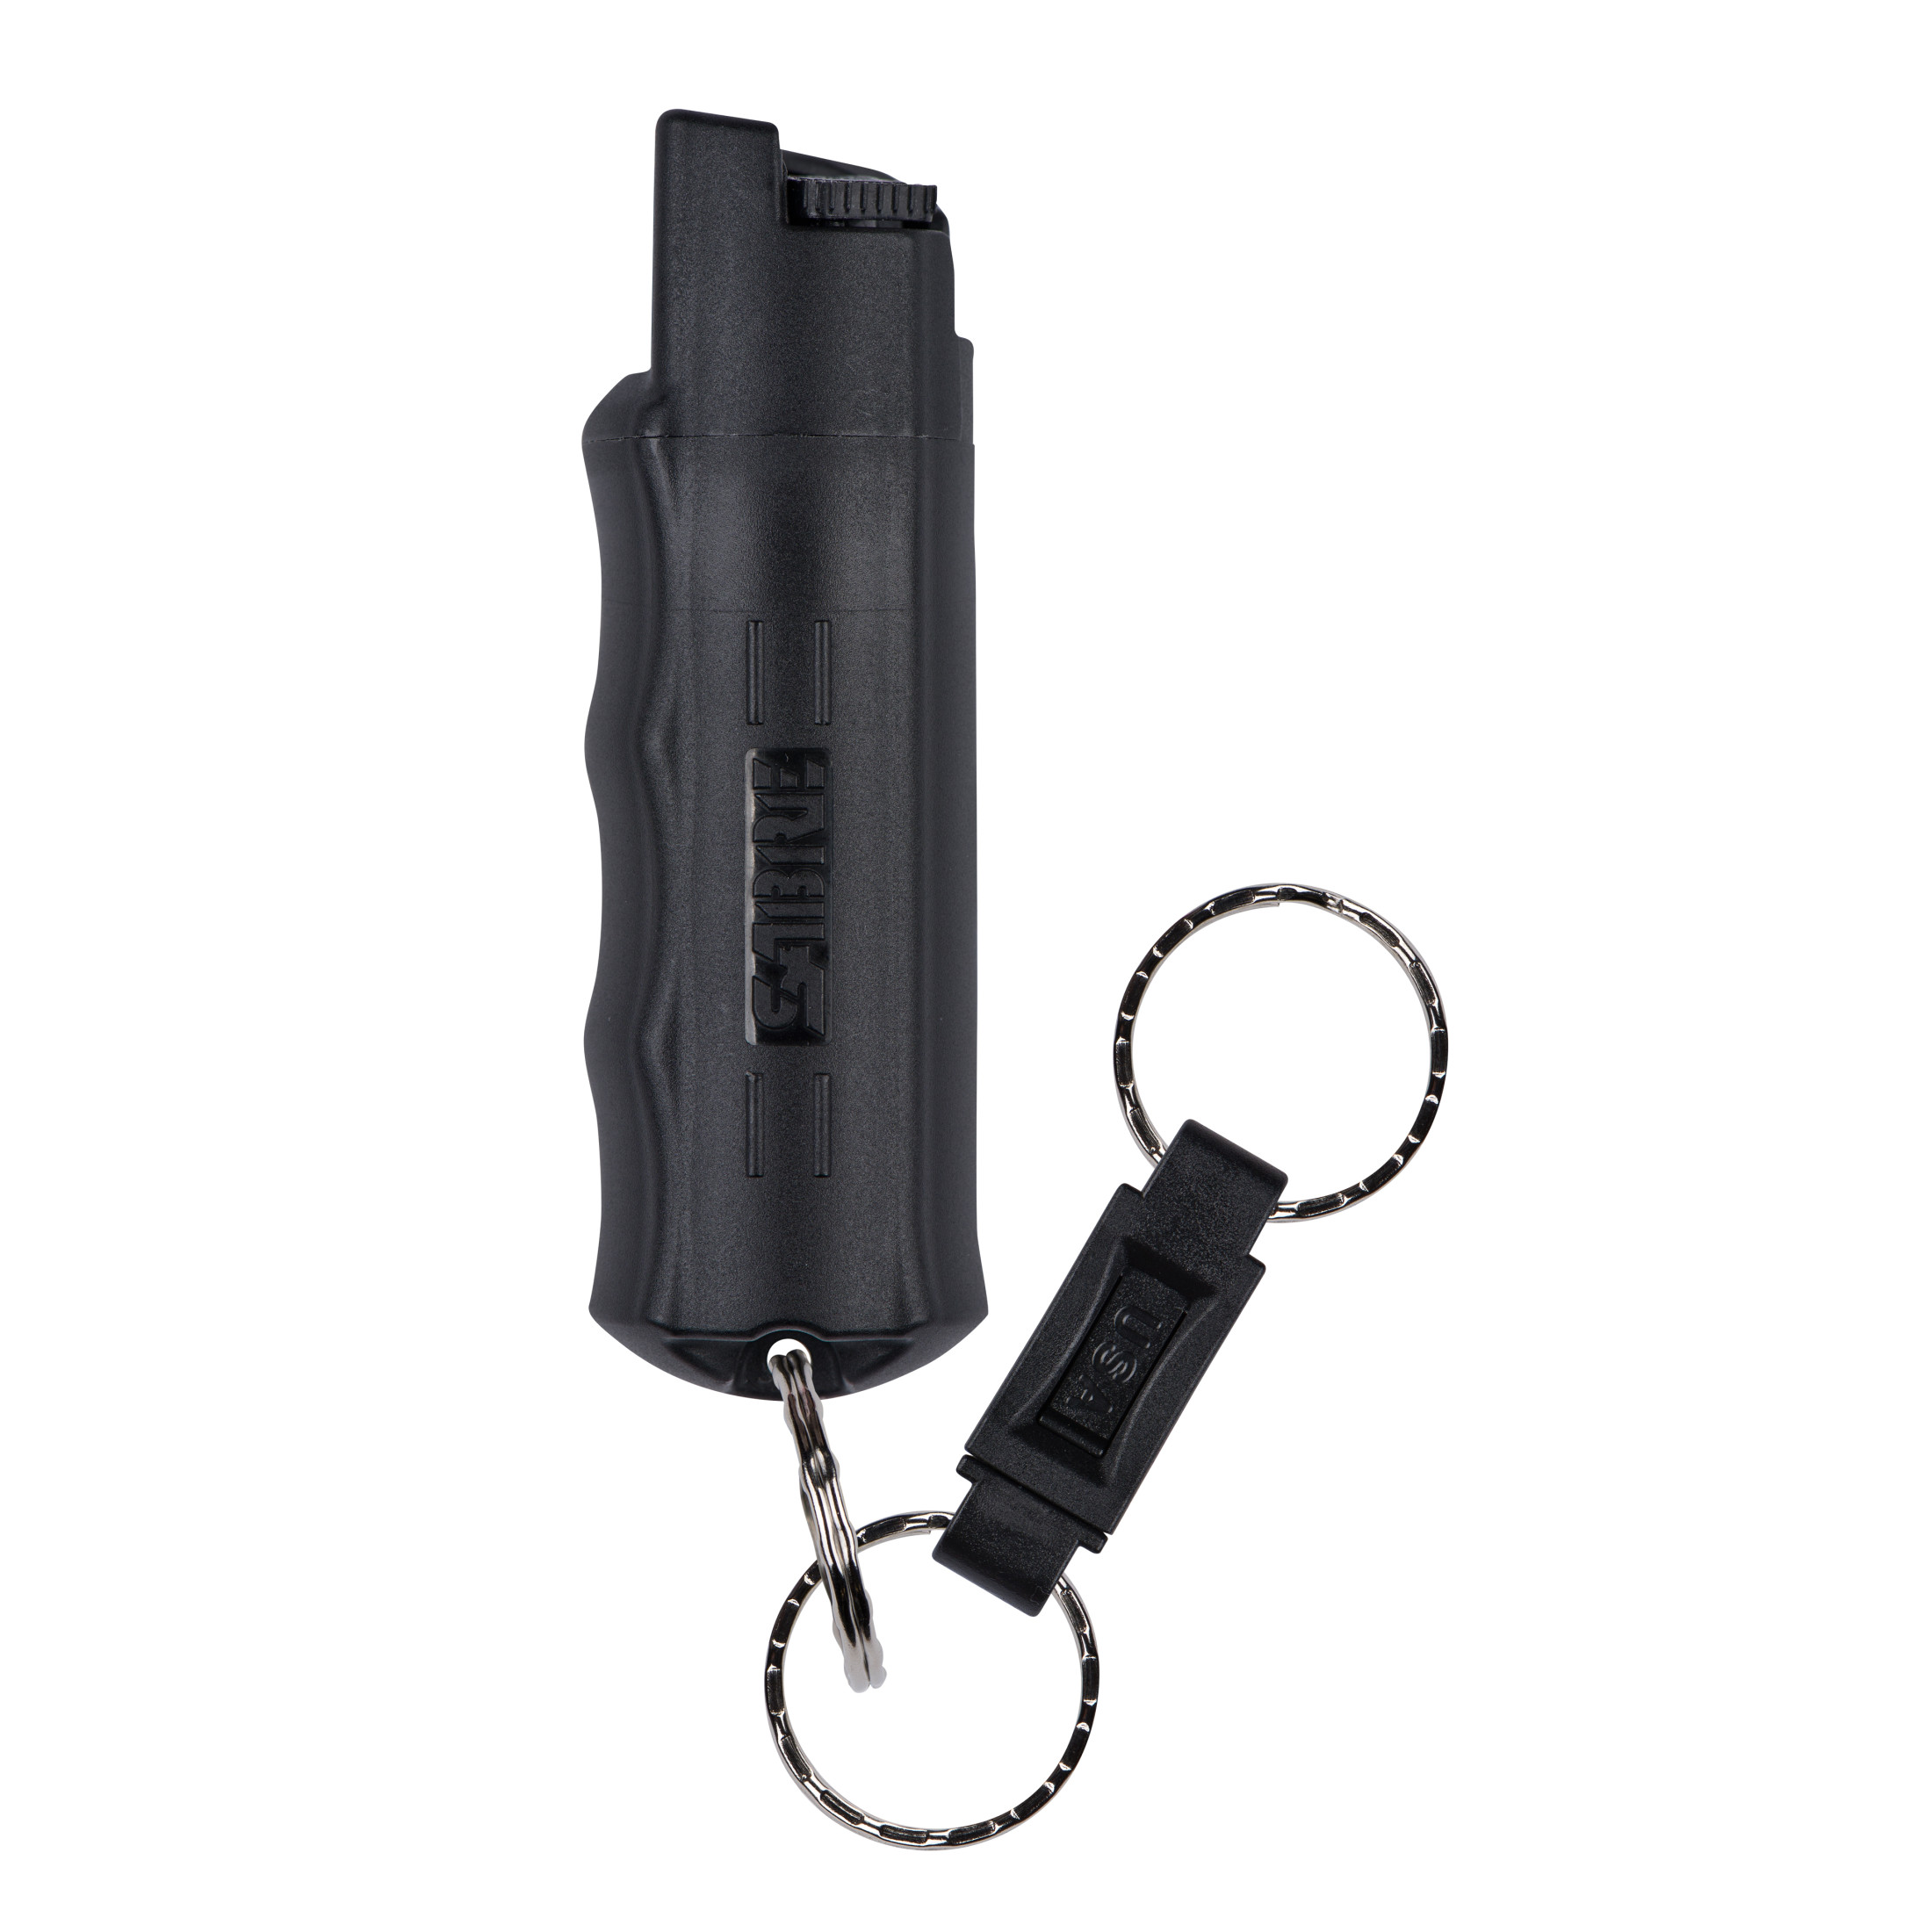 SABRE Pepper Spray with Quick Release Keychain, Black Color, 1 Ct, 0.21 lb, 1 in x 1 in x 3.6 in - image 1 of 8